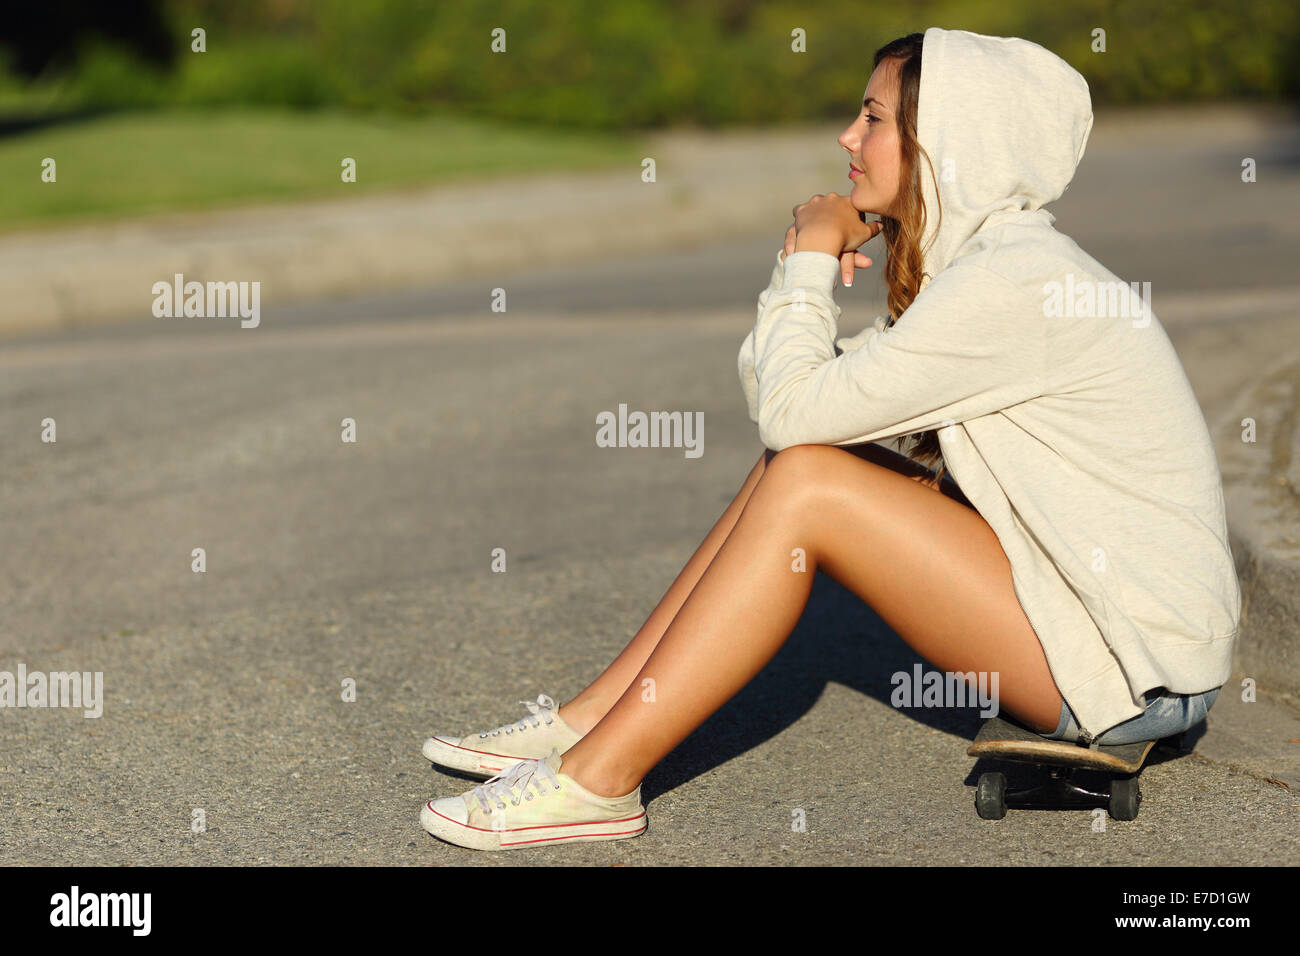 Full body of a profile of a pensive teenager girl sitting on a skate in the street looking away Stock Photo